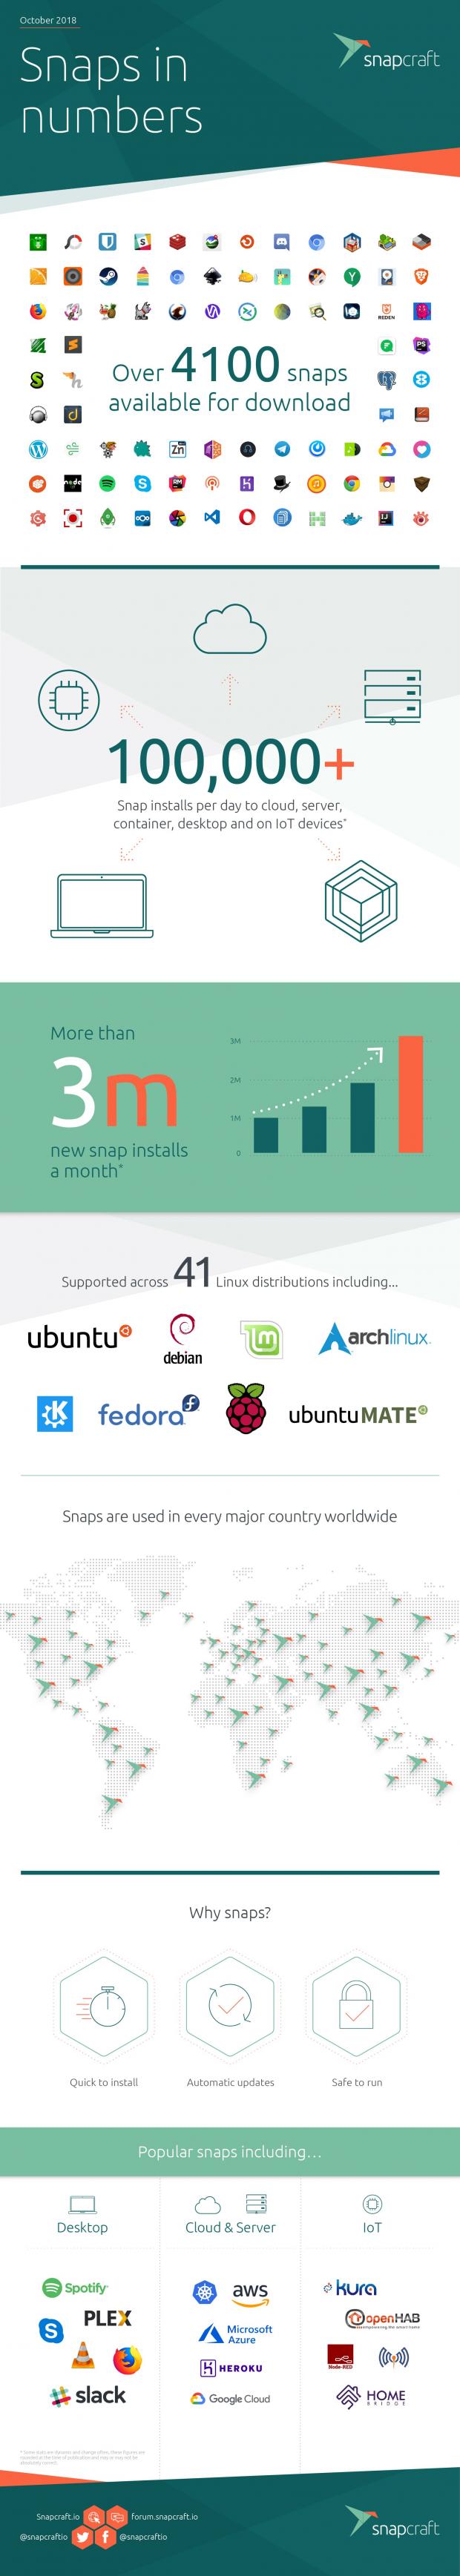 Infographic: snap packages (Source: Canonical)